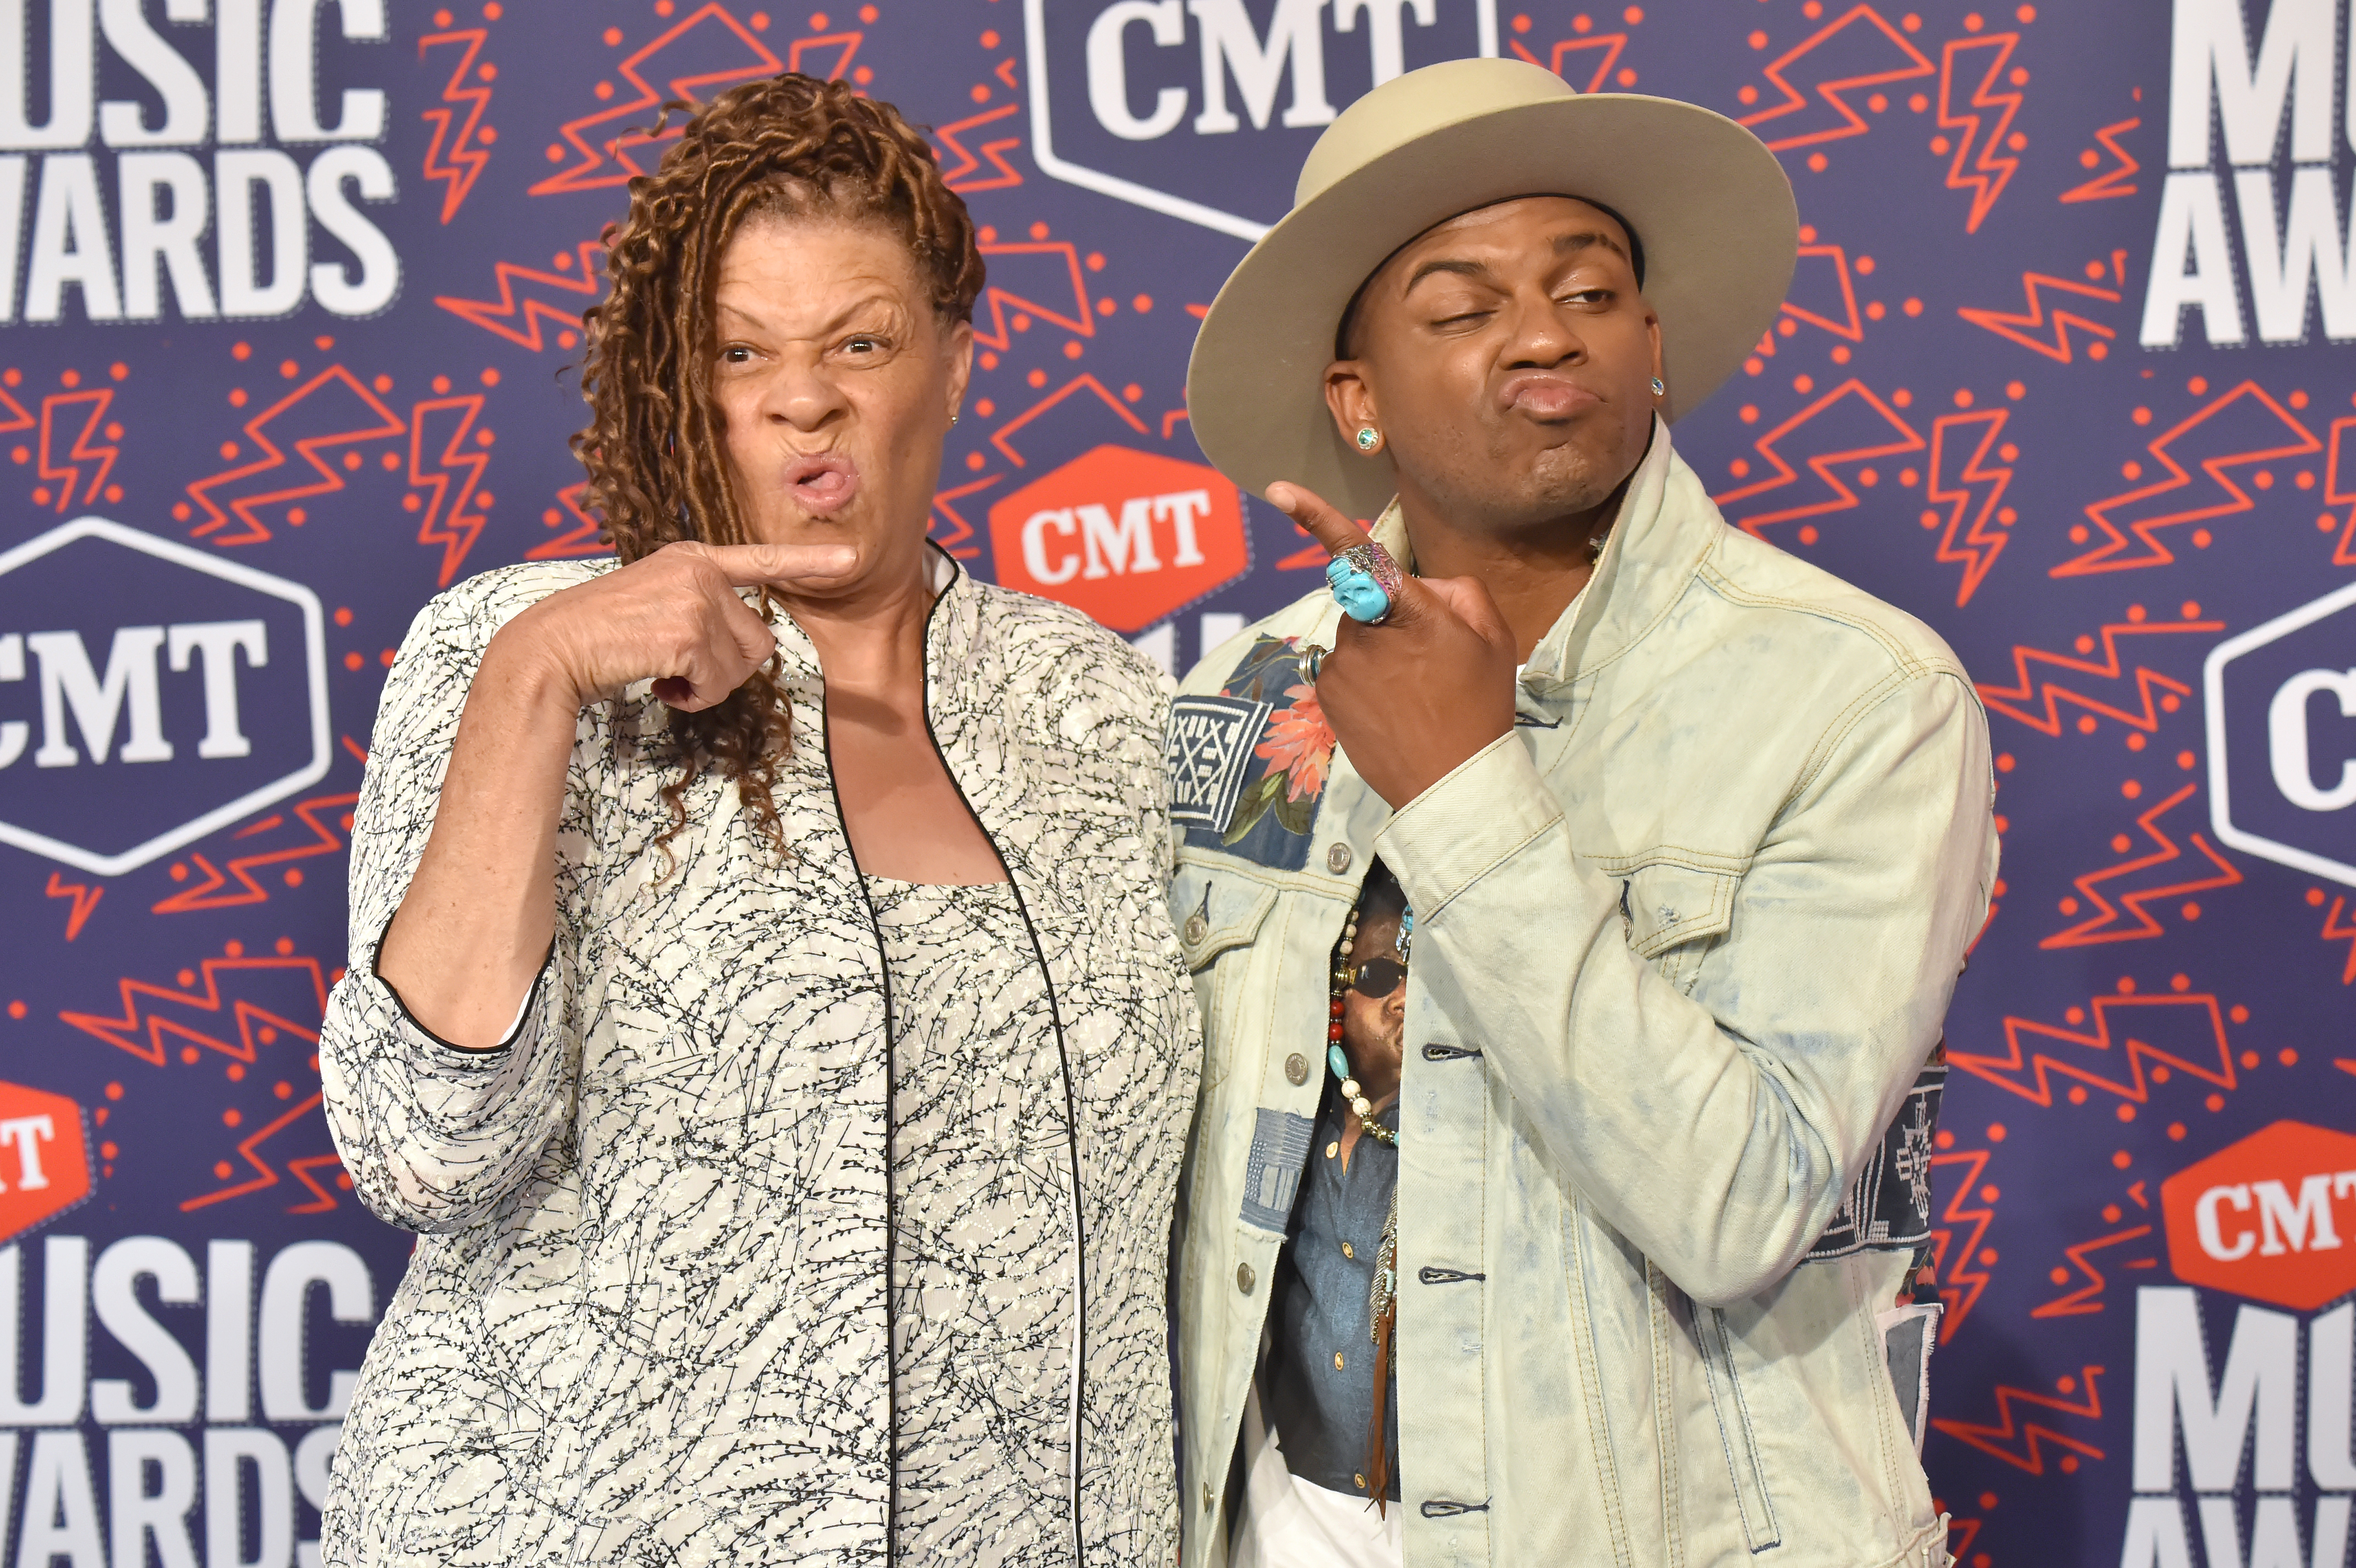 Jimmie Allen (R) and Angela Allen attend the 2019 CMT Music Awards at Bridgestone Arena, on June 5, 2019 in Nashville, Tennessee. | Source: Getty Images